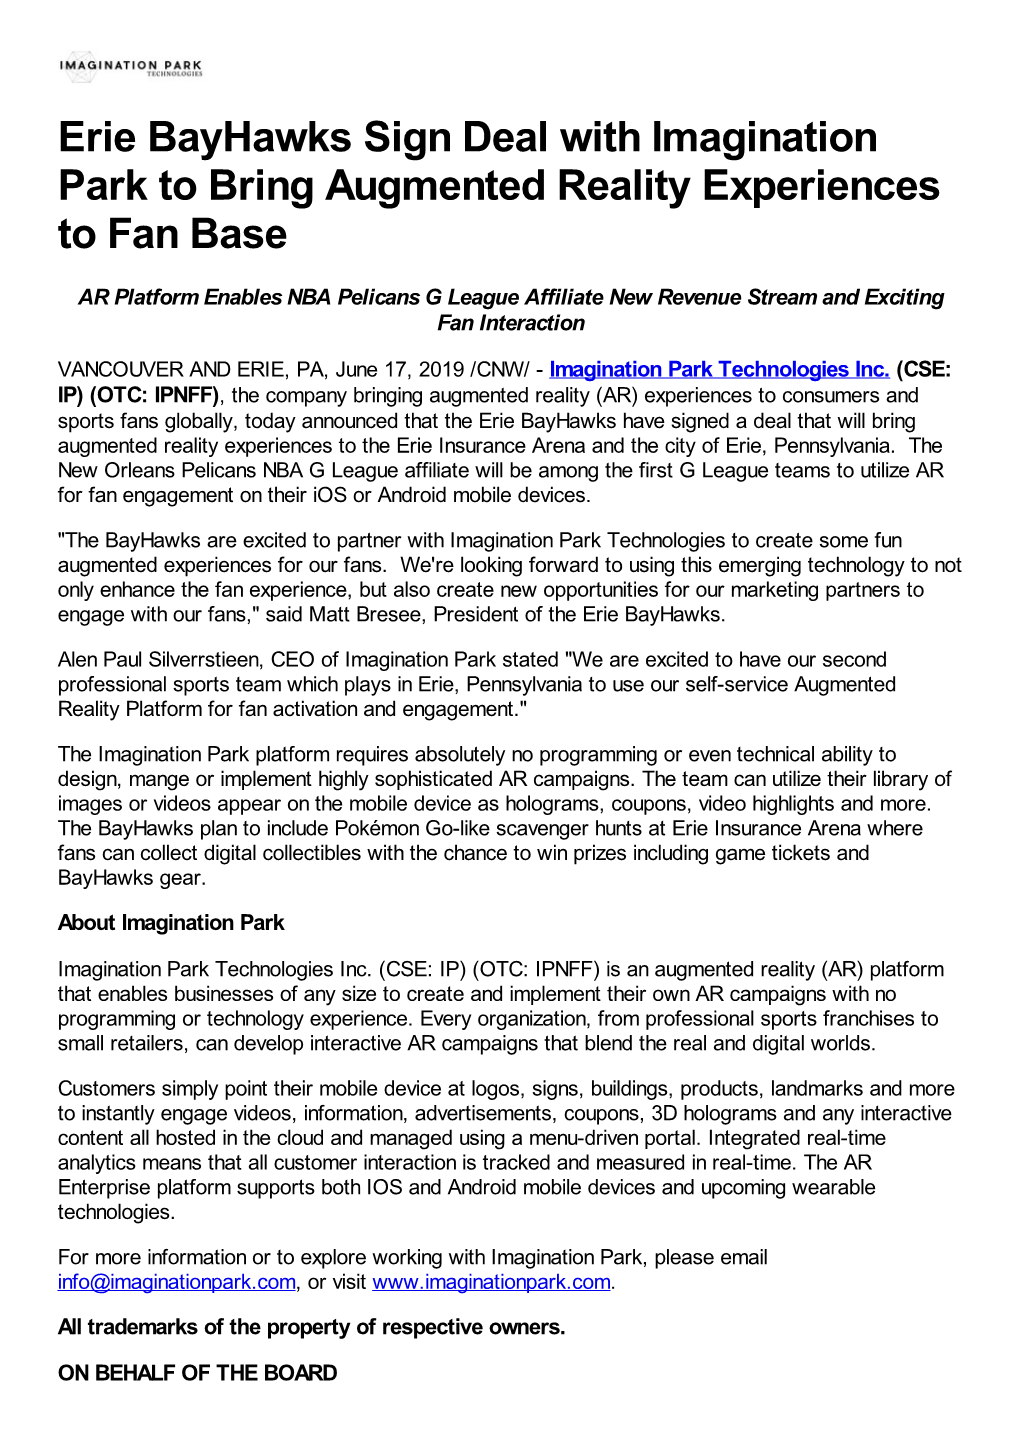 Erie Bayhawks Sign Deal with Imagination Park to Bring Augmented Reality Experiences to Fan Base